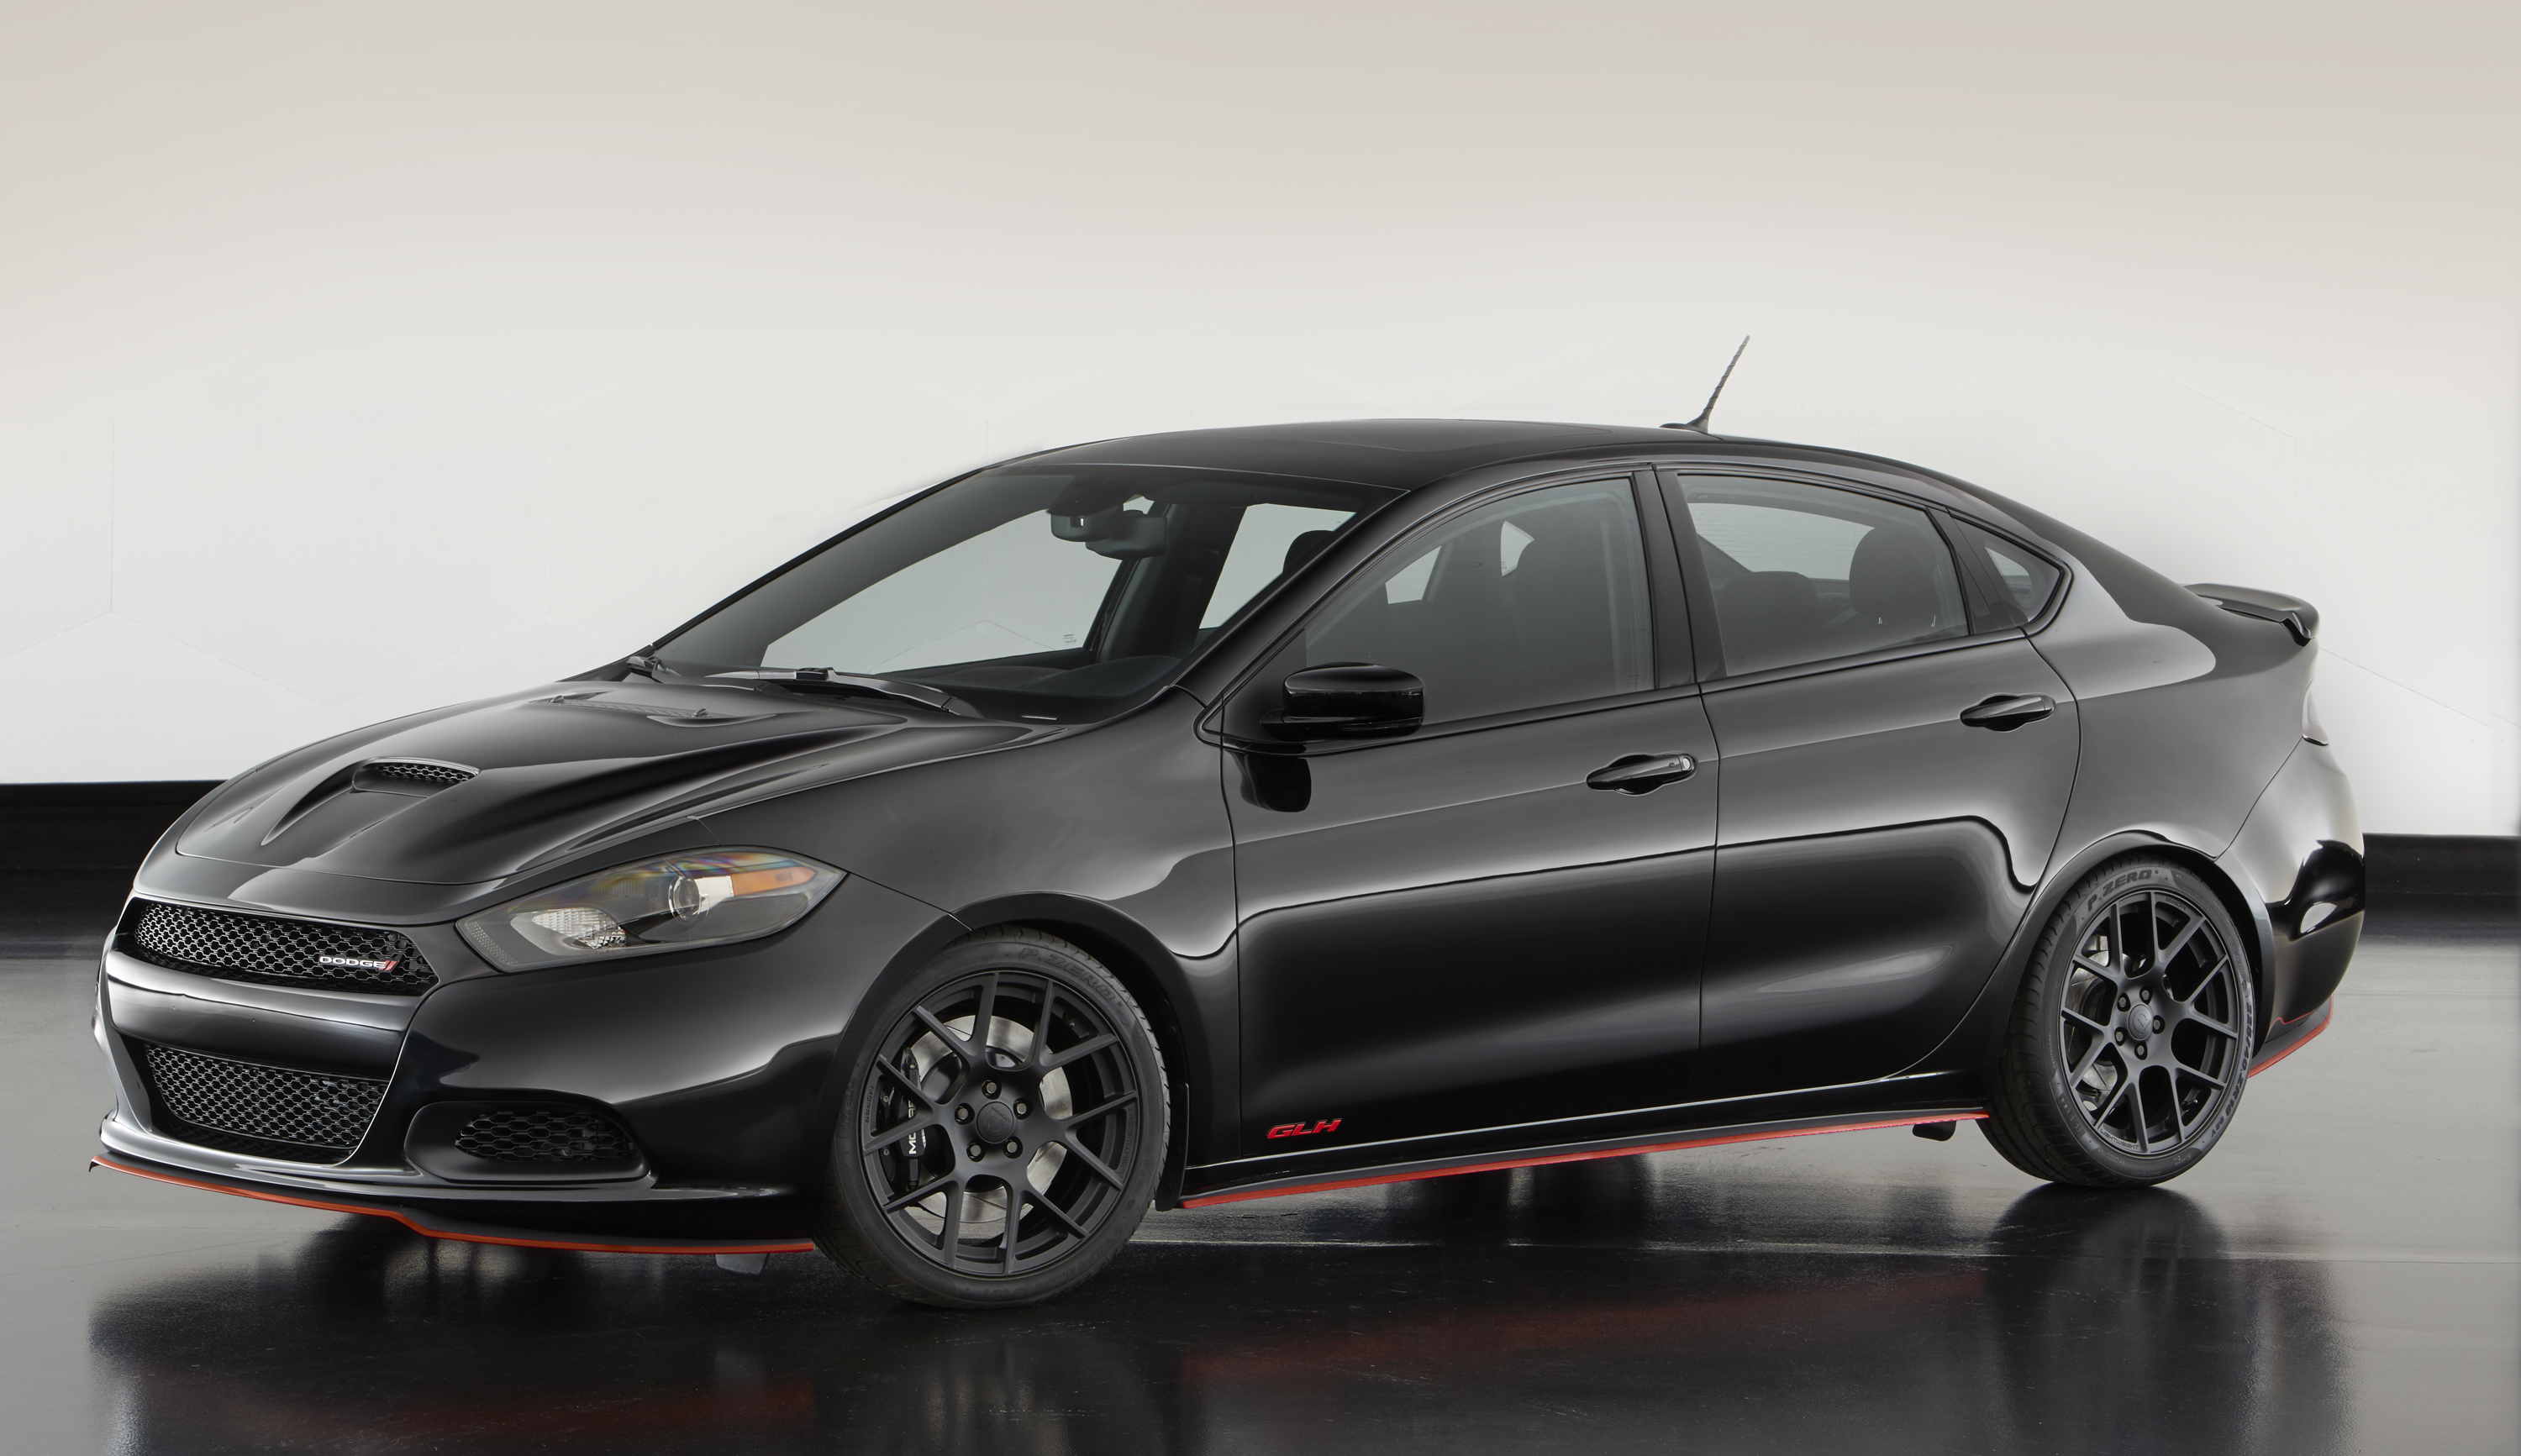 The Dodge Dart GLH Concept is among the Mopar-modified vehicles